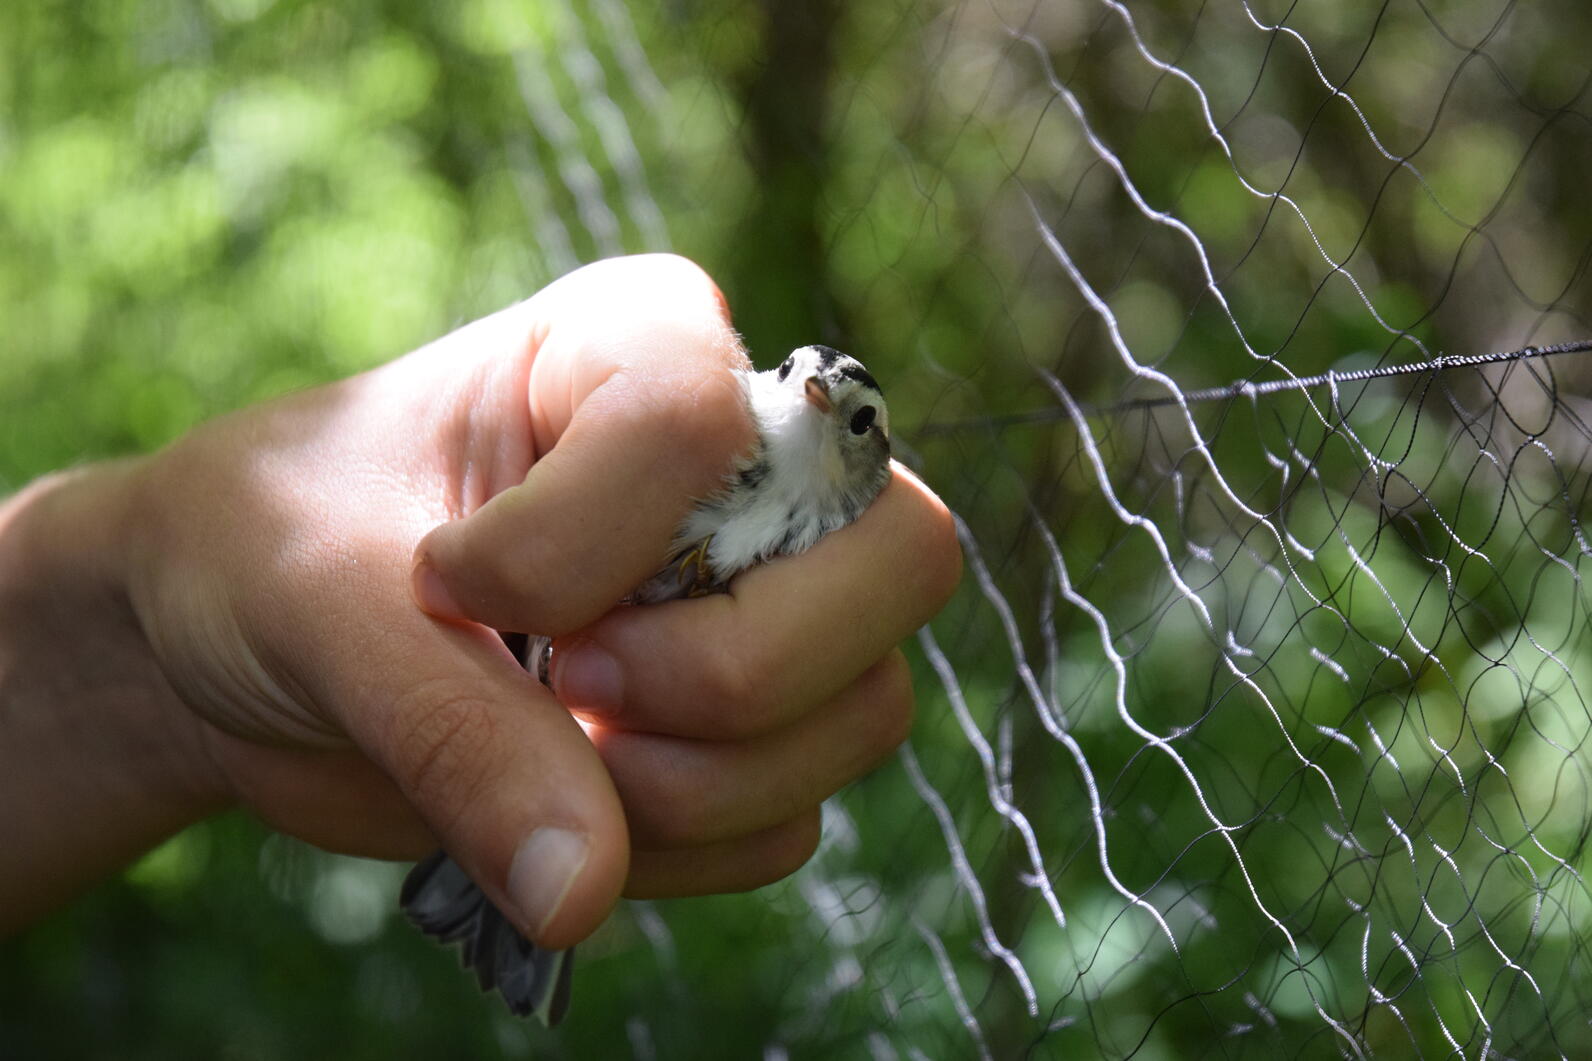 A Black-and-white Warbler is held in a hand next to a fine mesh net.